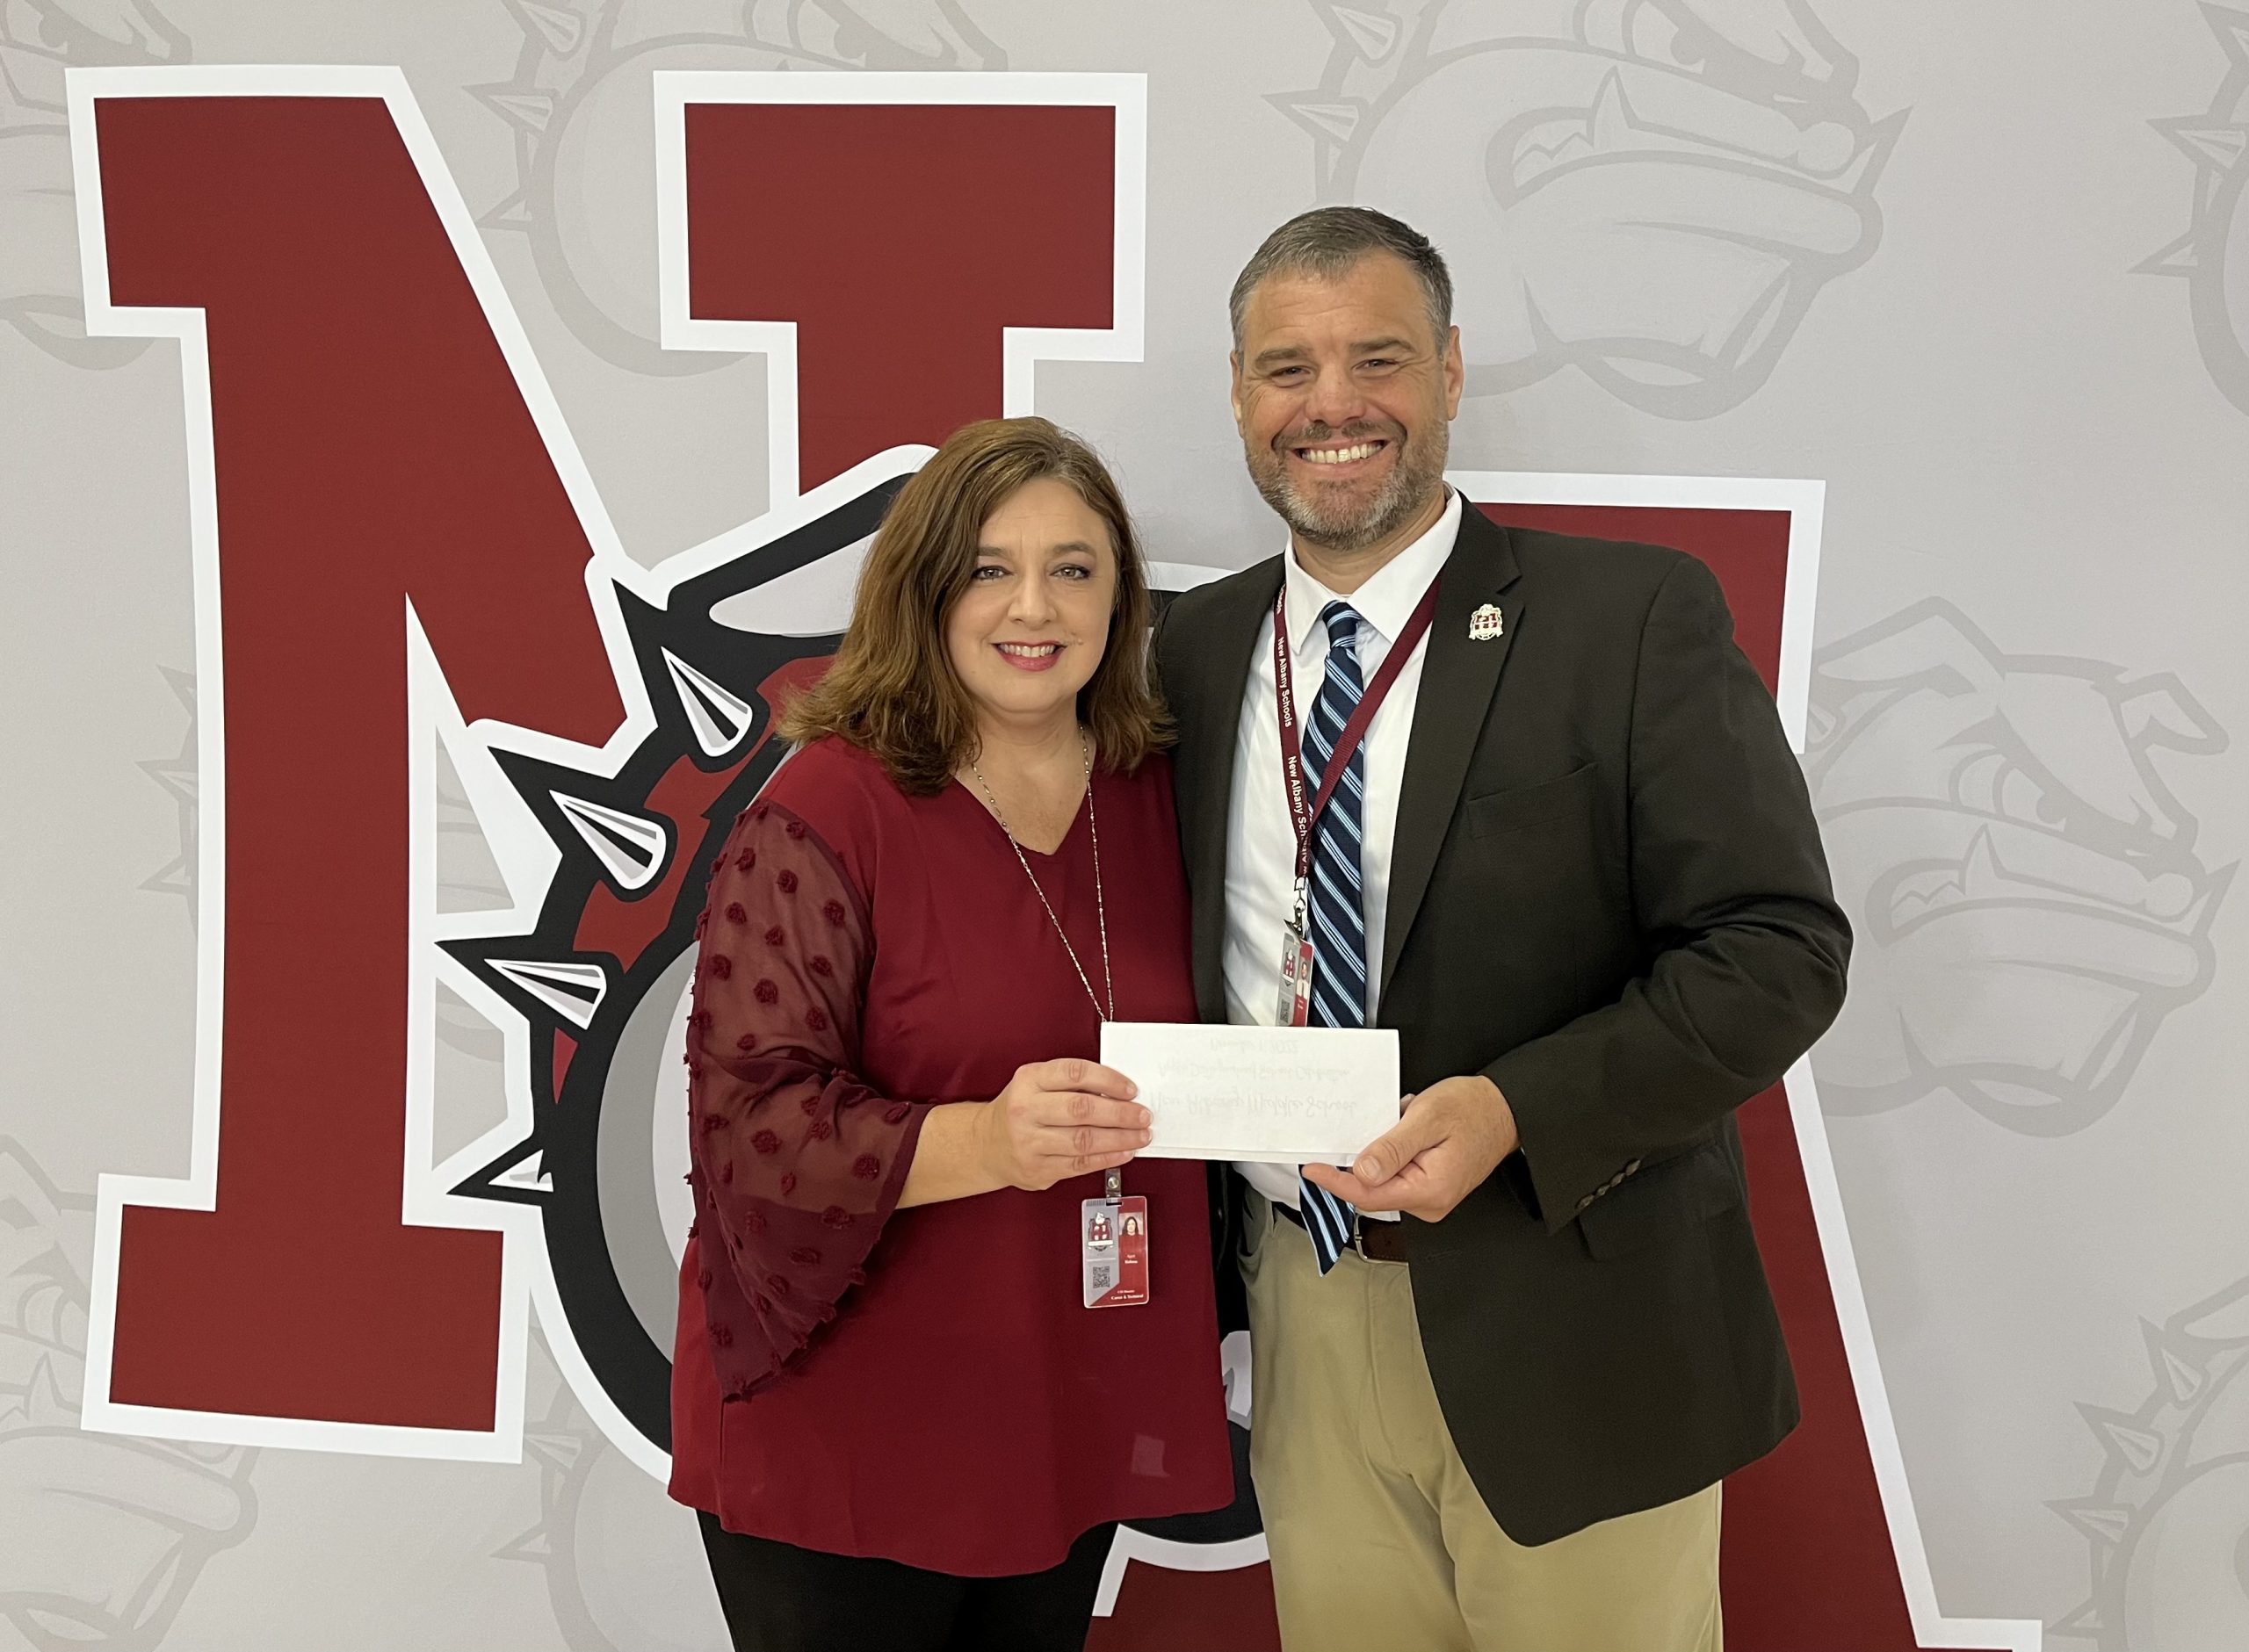 New Albany School of Career & Technical Education has been selected to receive a $2,250 Walmart Community grant. This money will assist in the implementation of a greenhouse program for the Agriscience classes. PIctured are l-r: April Hobson, Career & Technical Director and Dr. Lance Evans, Superintendent.